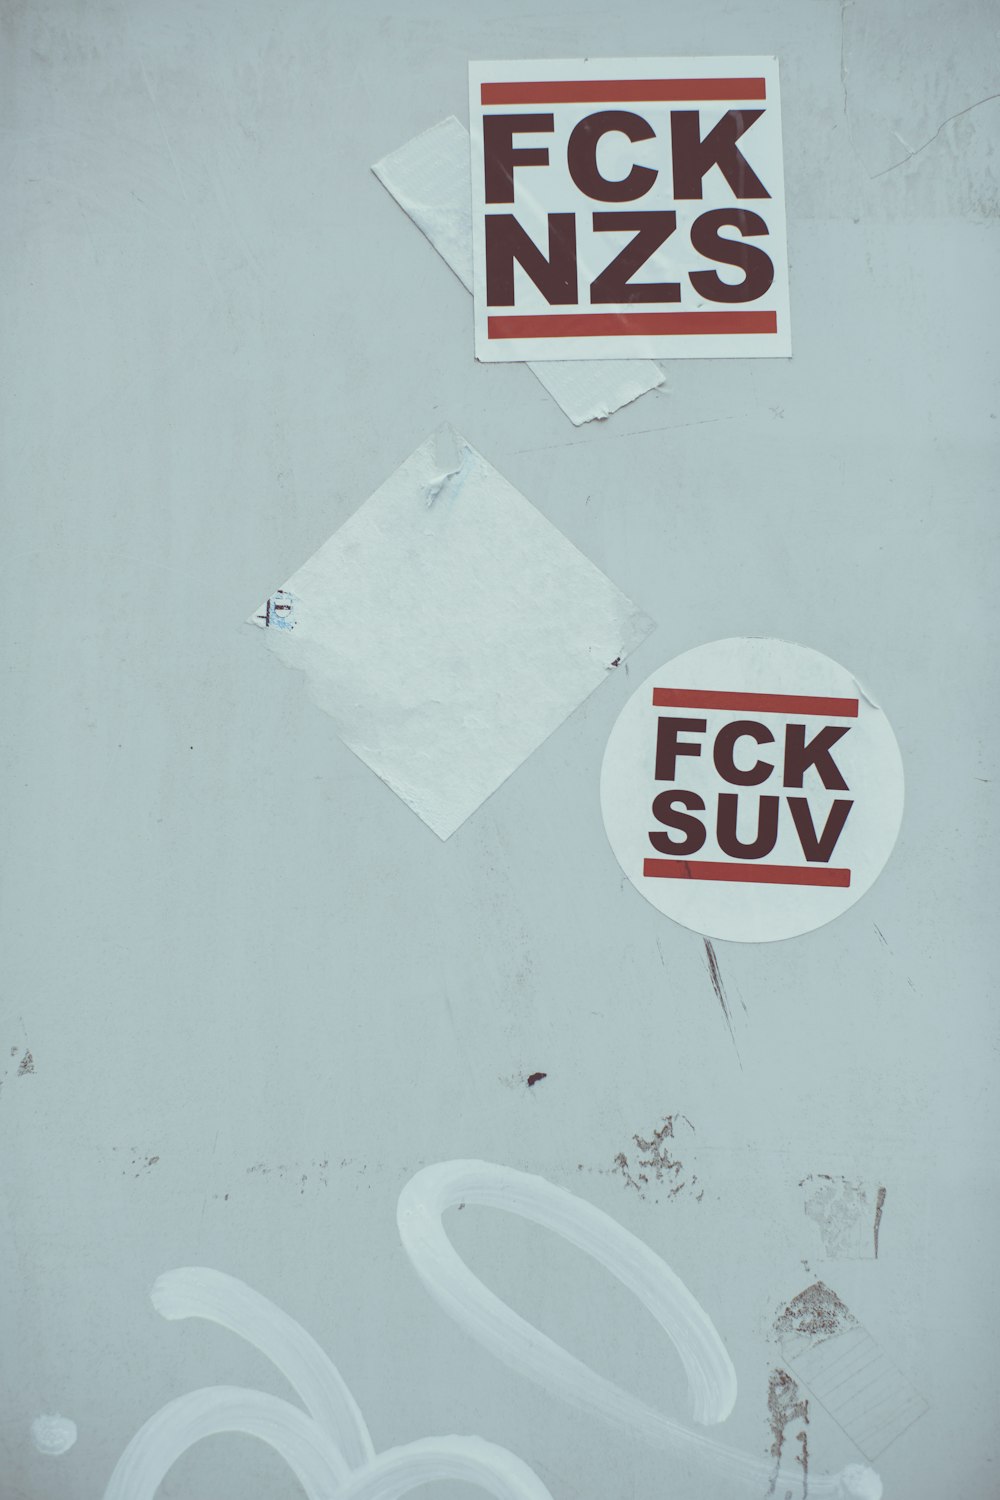 stickers on the side of a building that says fok nzs